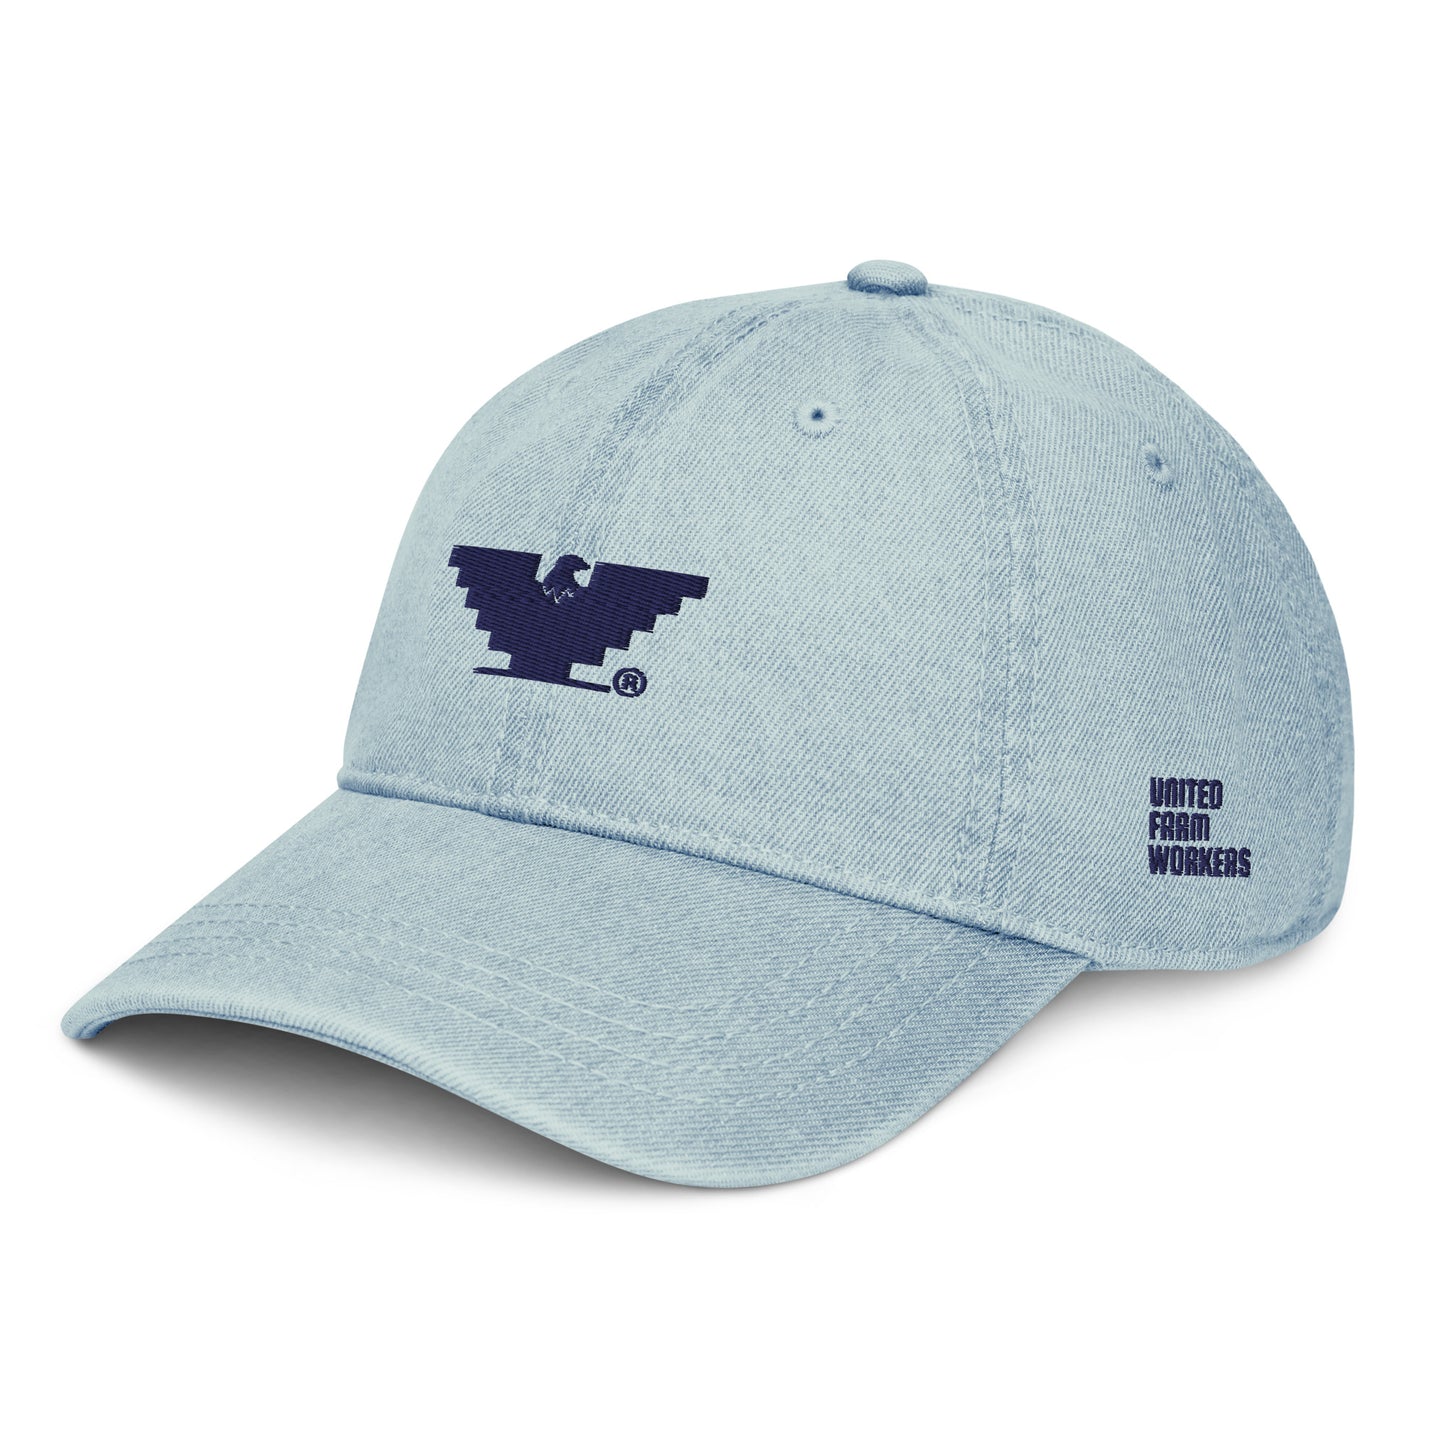 UFW® - United Farm Workers Hat (Washed)